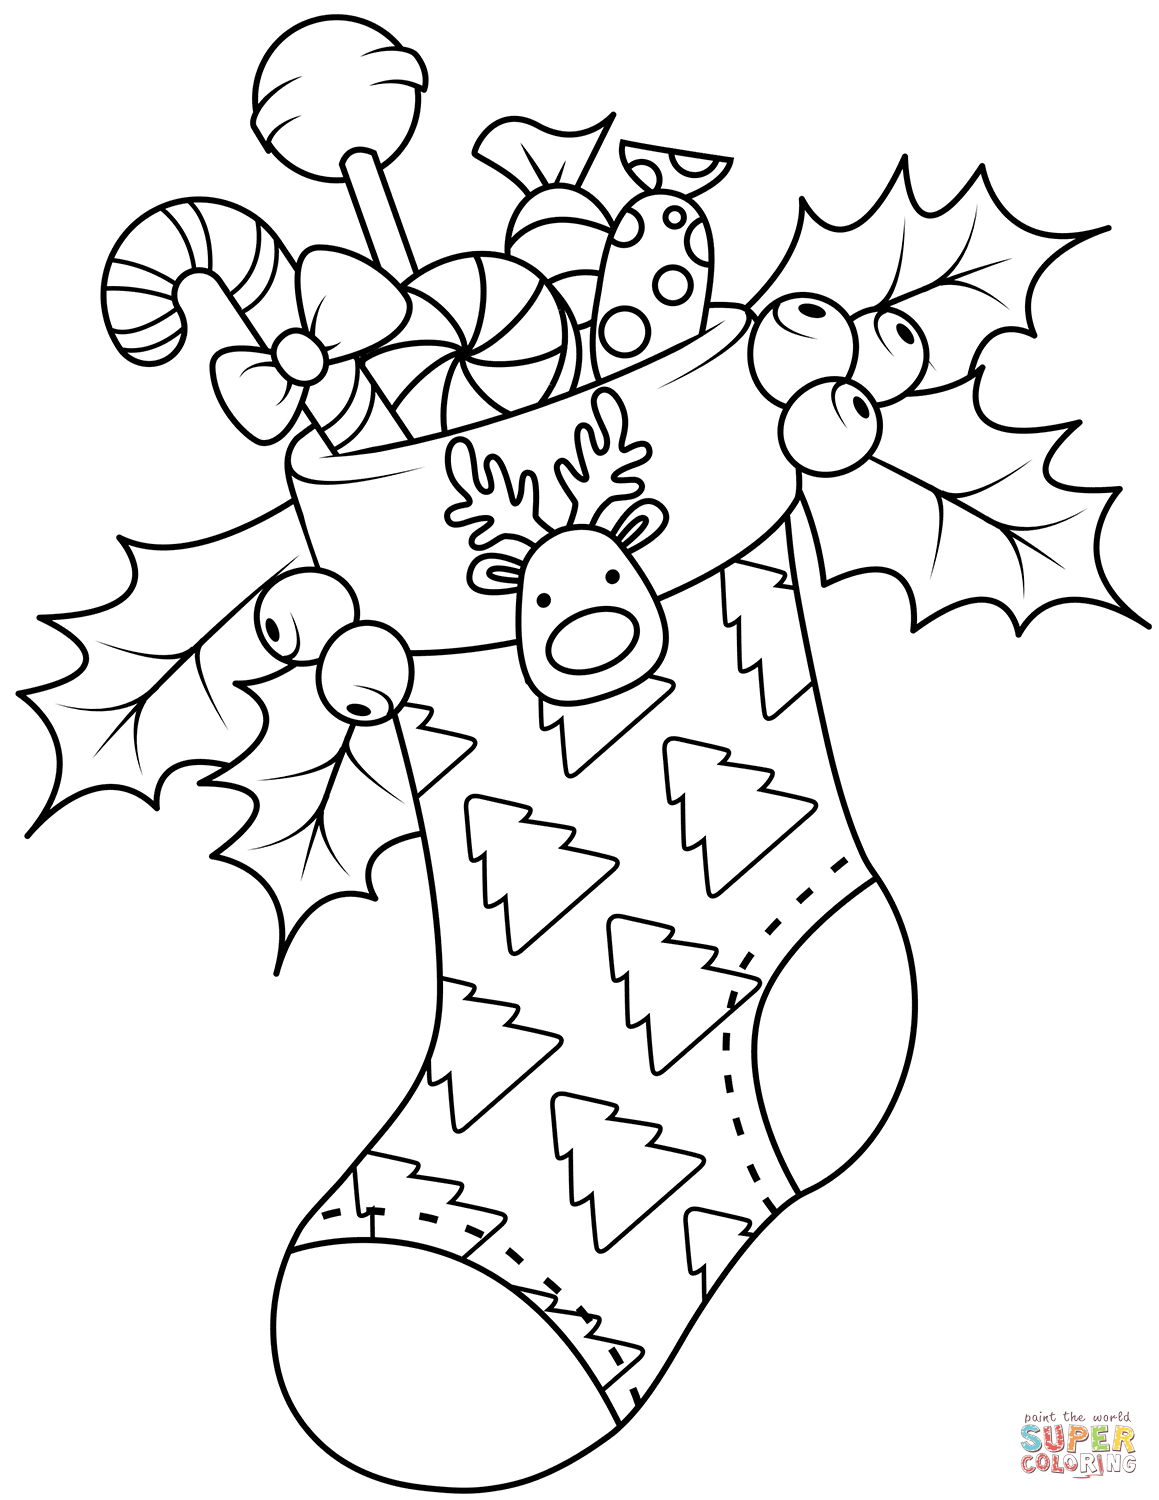 stocking coloring pictures Stocking christmas coloring pages mouse kids clipart little tiny printable hidding boot print stockings drawing clip color pinclipart candy cane